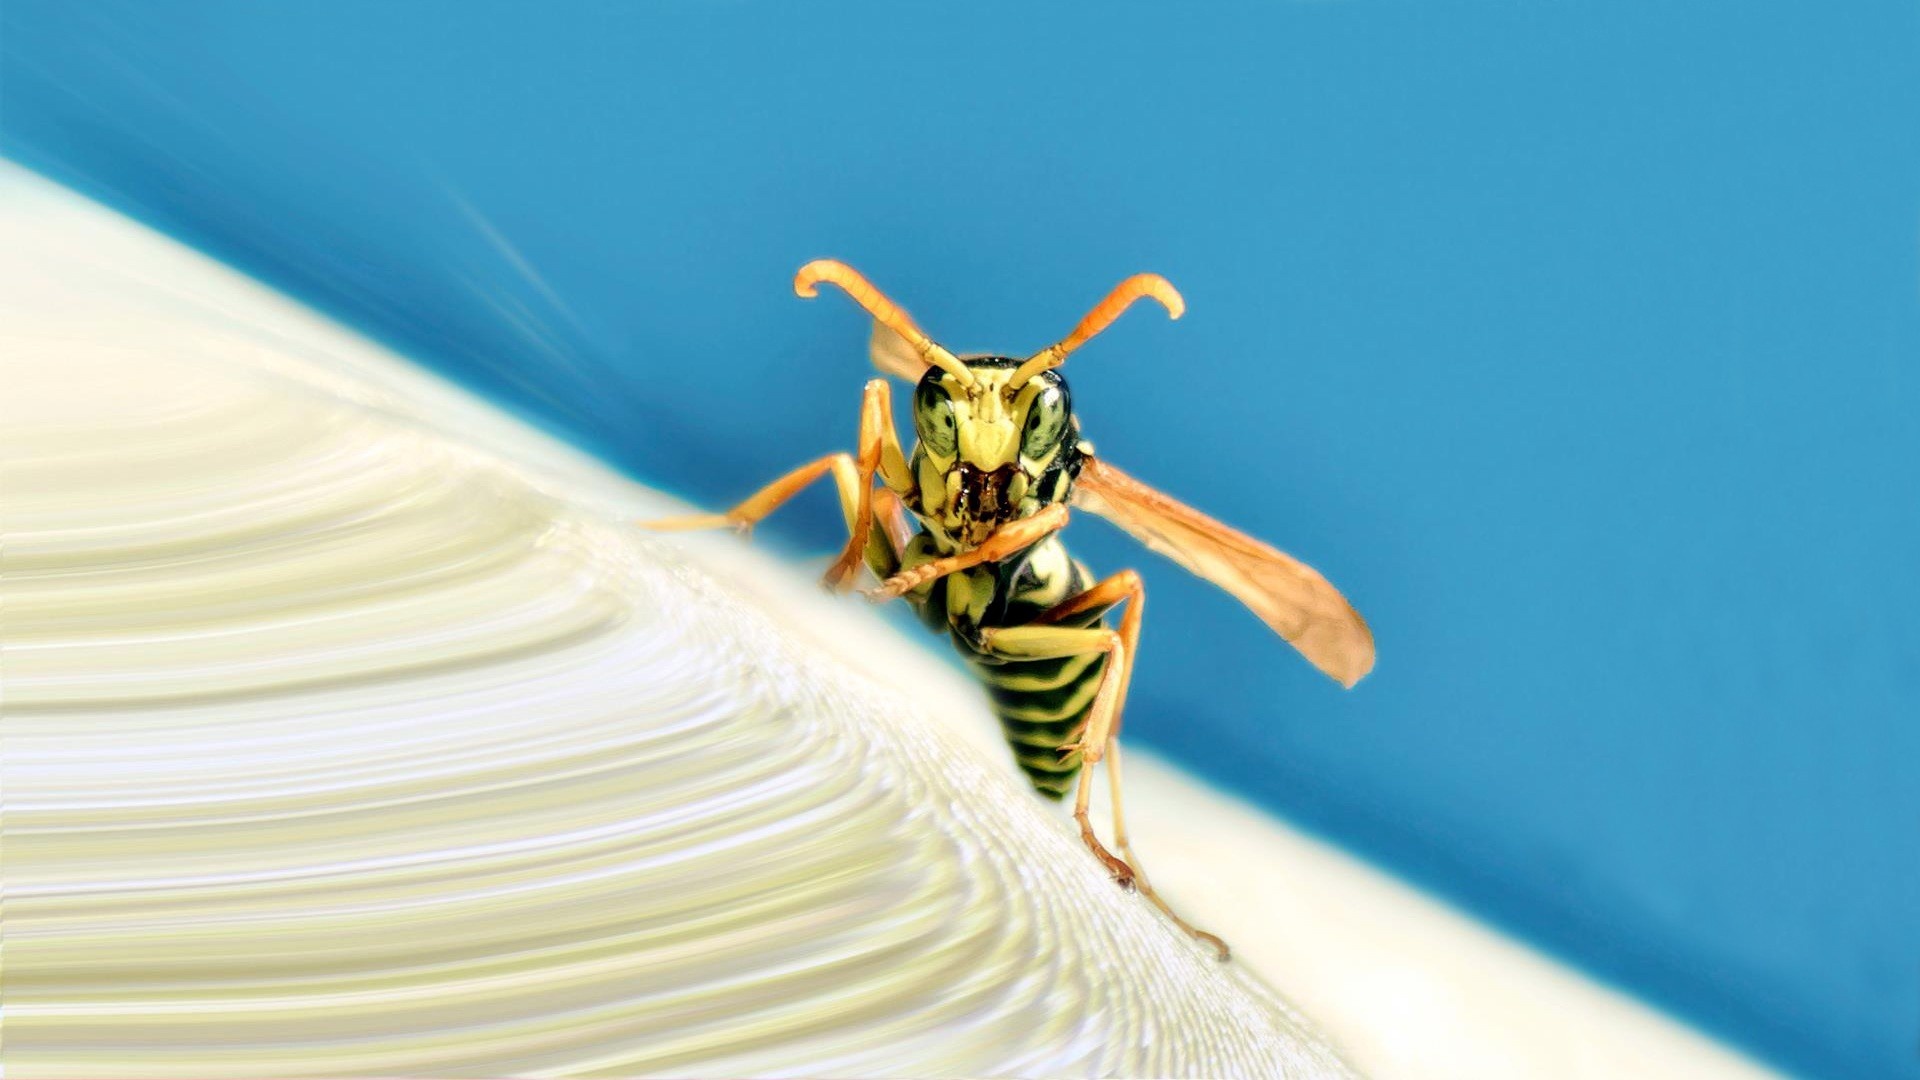 Wasp wallpapers, Insect beauty, Nature's tiny warriors, 4K resolution, 1920x1080 Full HD Desktop